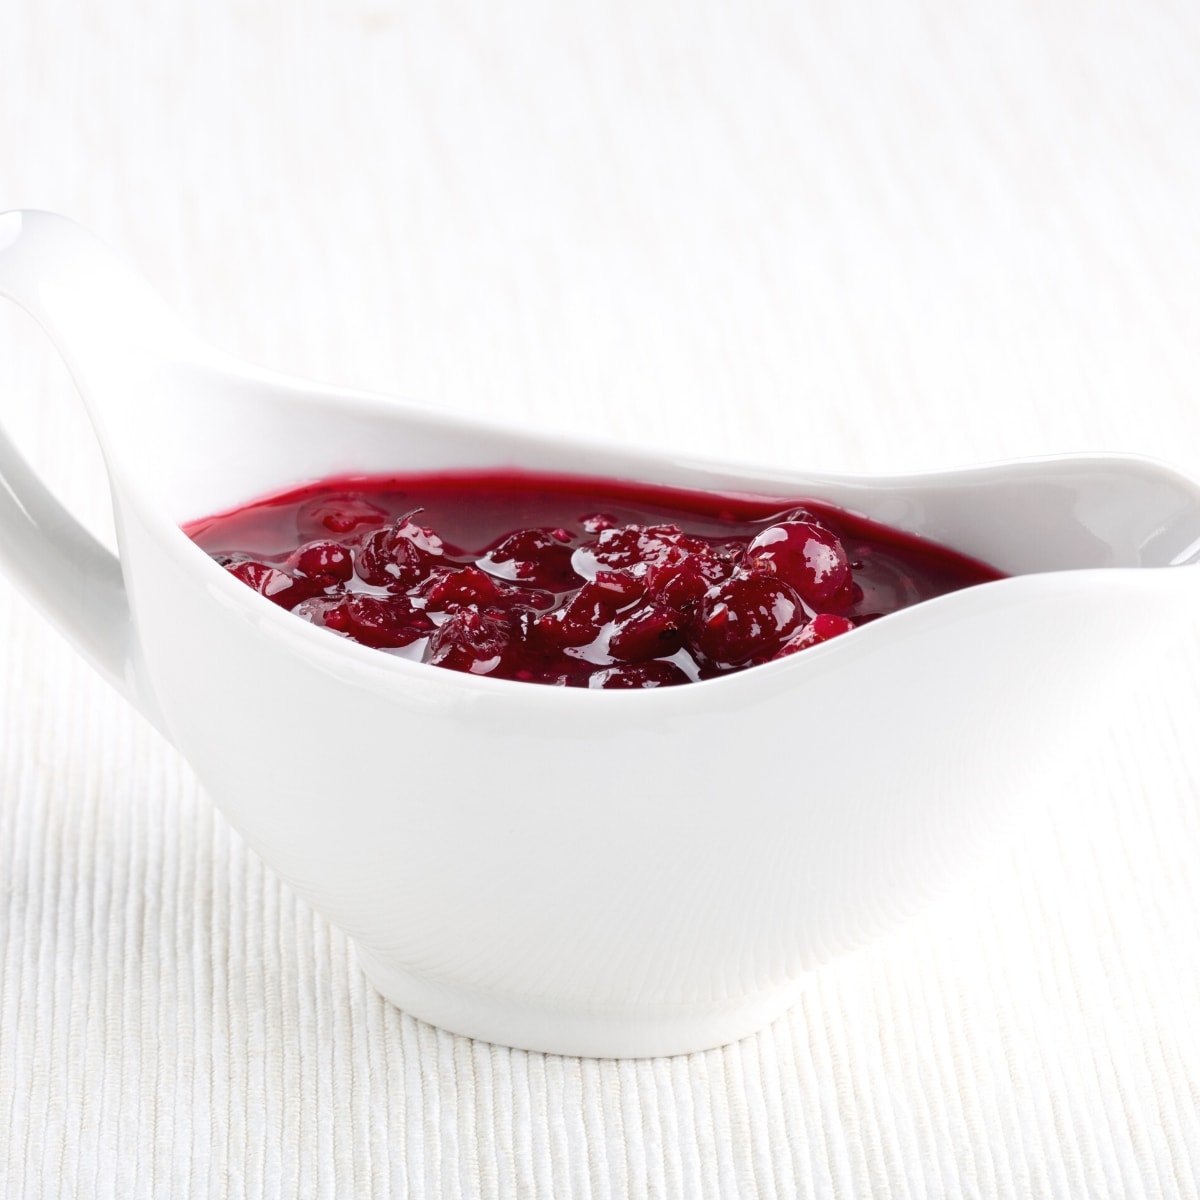 A white ceramic container filled with red cranberry sauce.